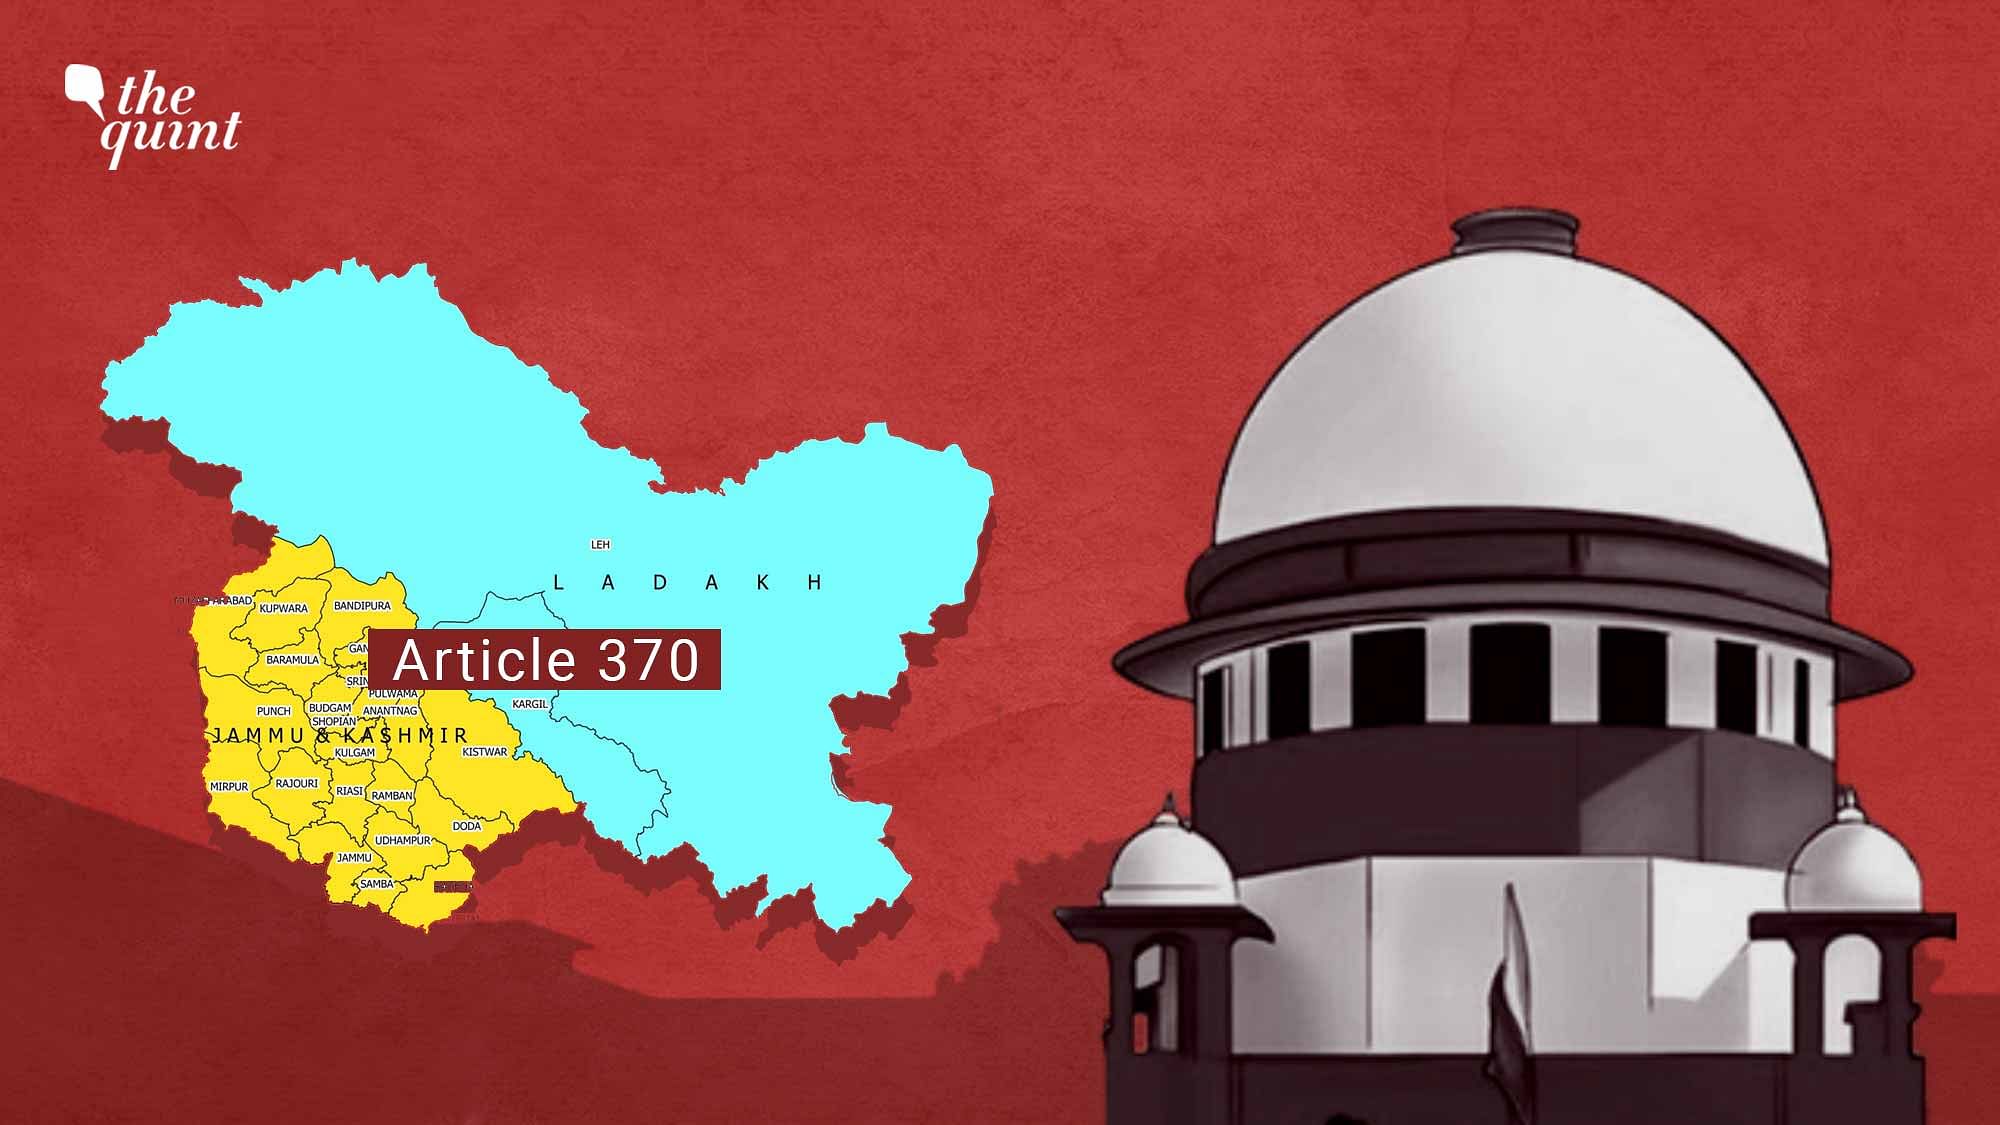 <div class="paragraphs"><p>In this article, we delve into the nuances of the apex court's judgment, focusing specifically on the constitutionality of the Union’s approach to abrogate Article 370, directions to restore statehood to J&amp;K, and the establishment of a Truth and Reconciliation Commission in the near future.</p></div>